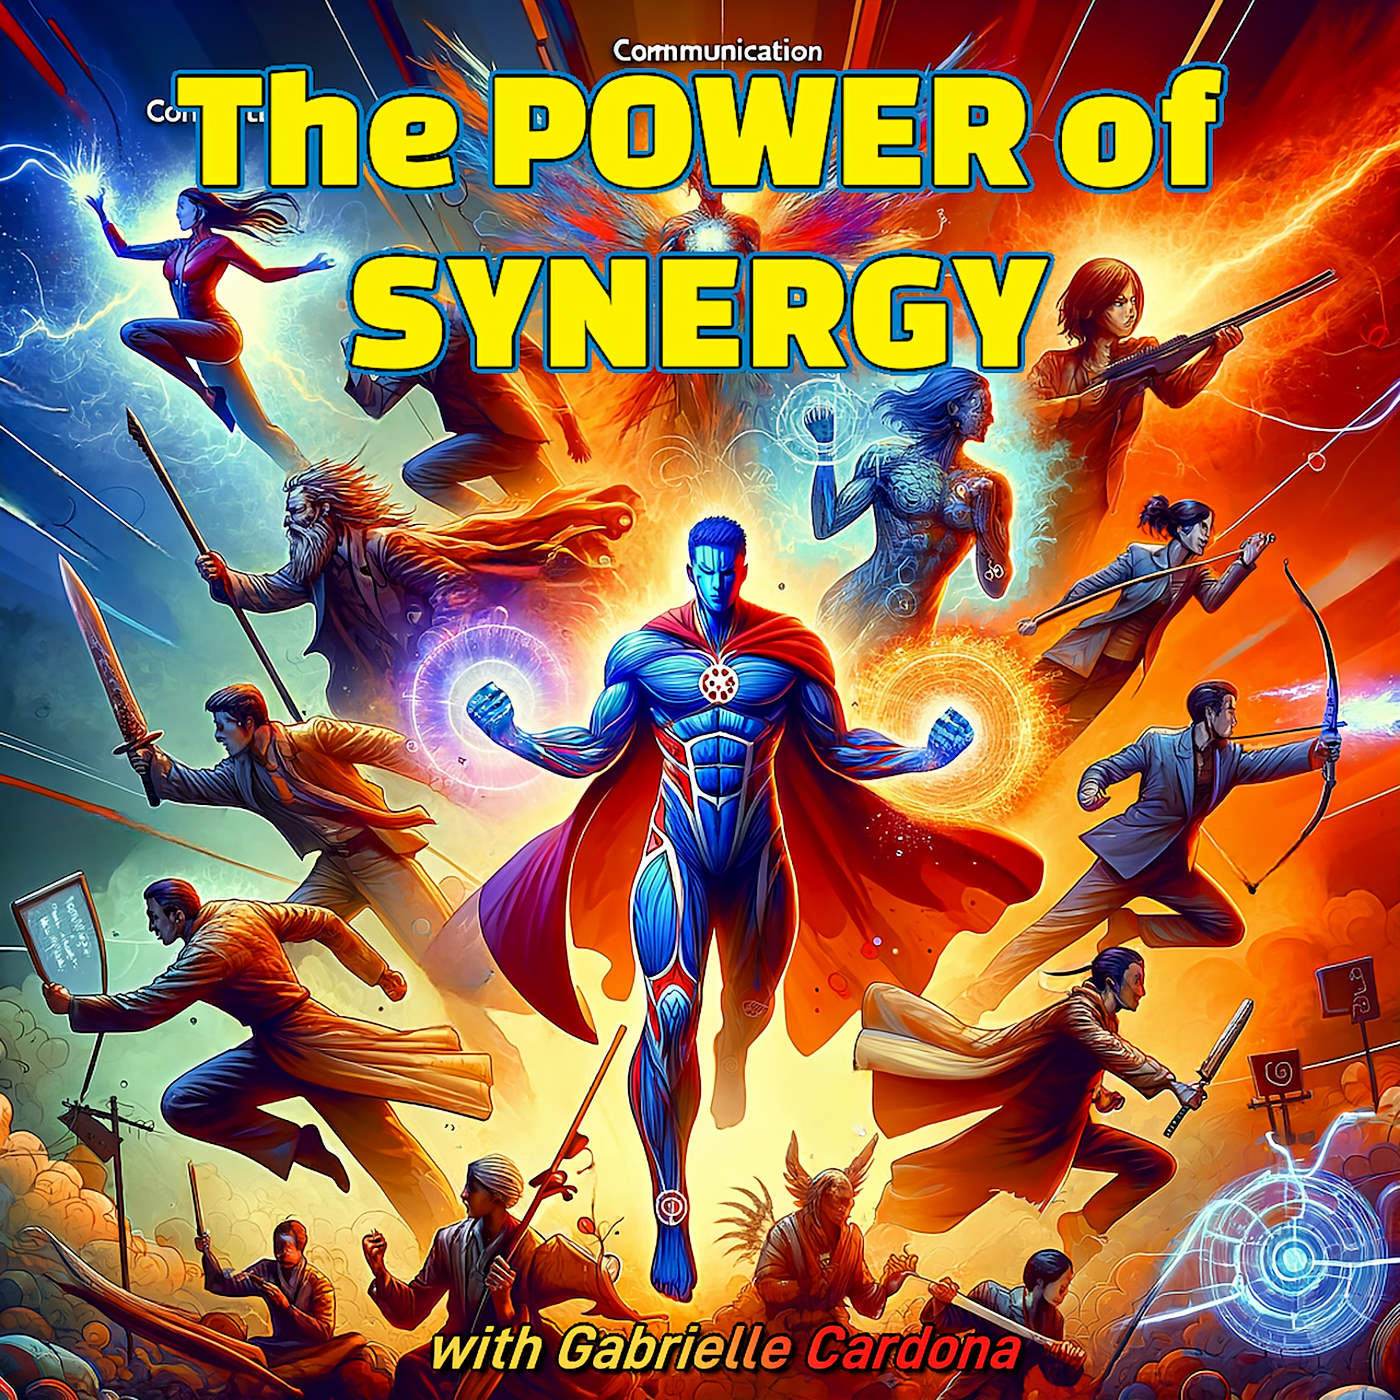 The Power of Synergy